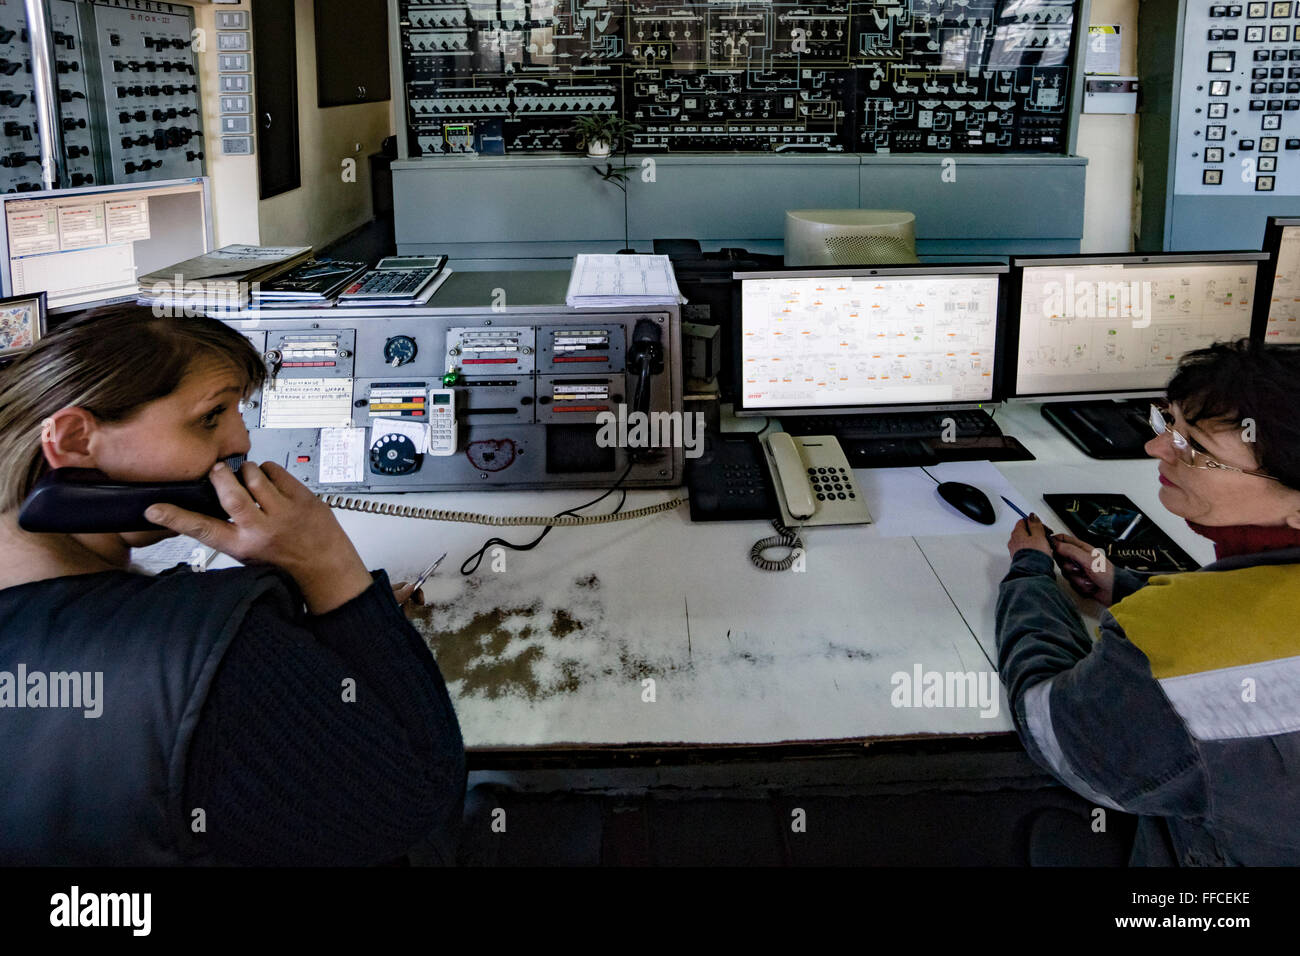 Workers are seen in a control room of a DTEK operated coal processing plant in Donbas, Ukraine. Stock Photo